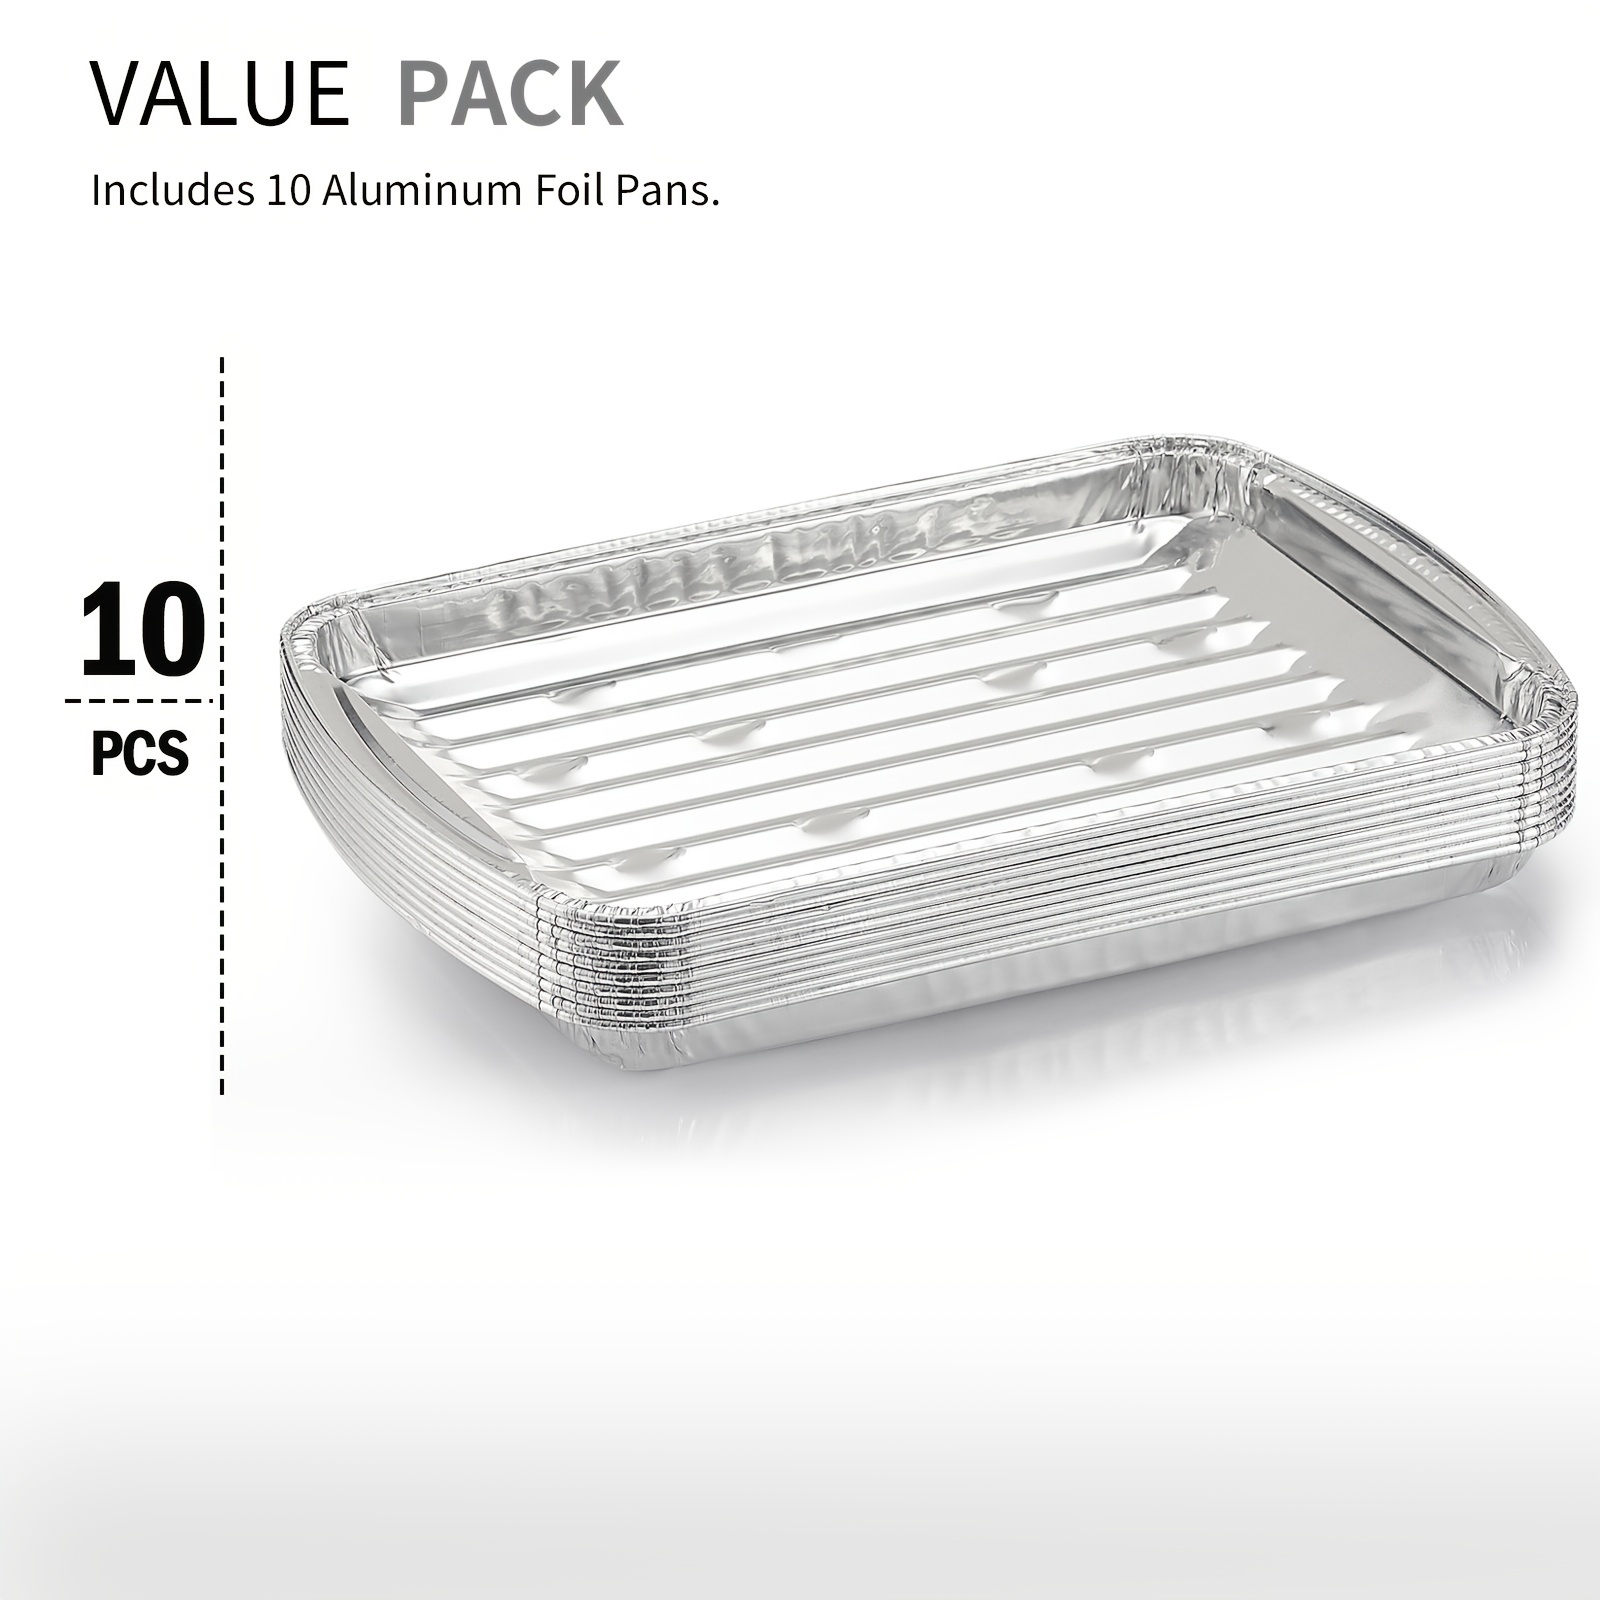 Grills, trays and sheets